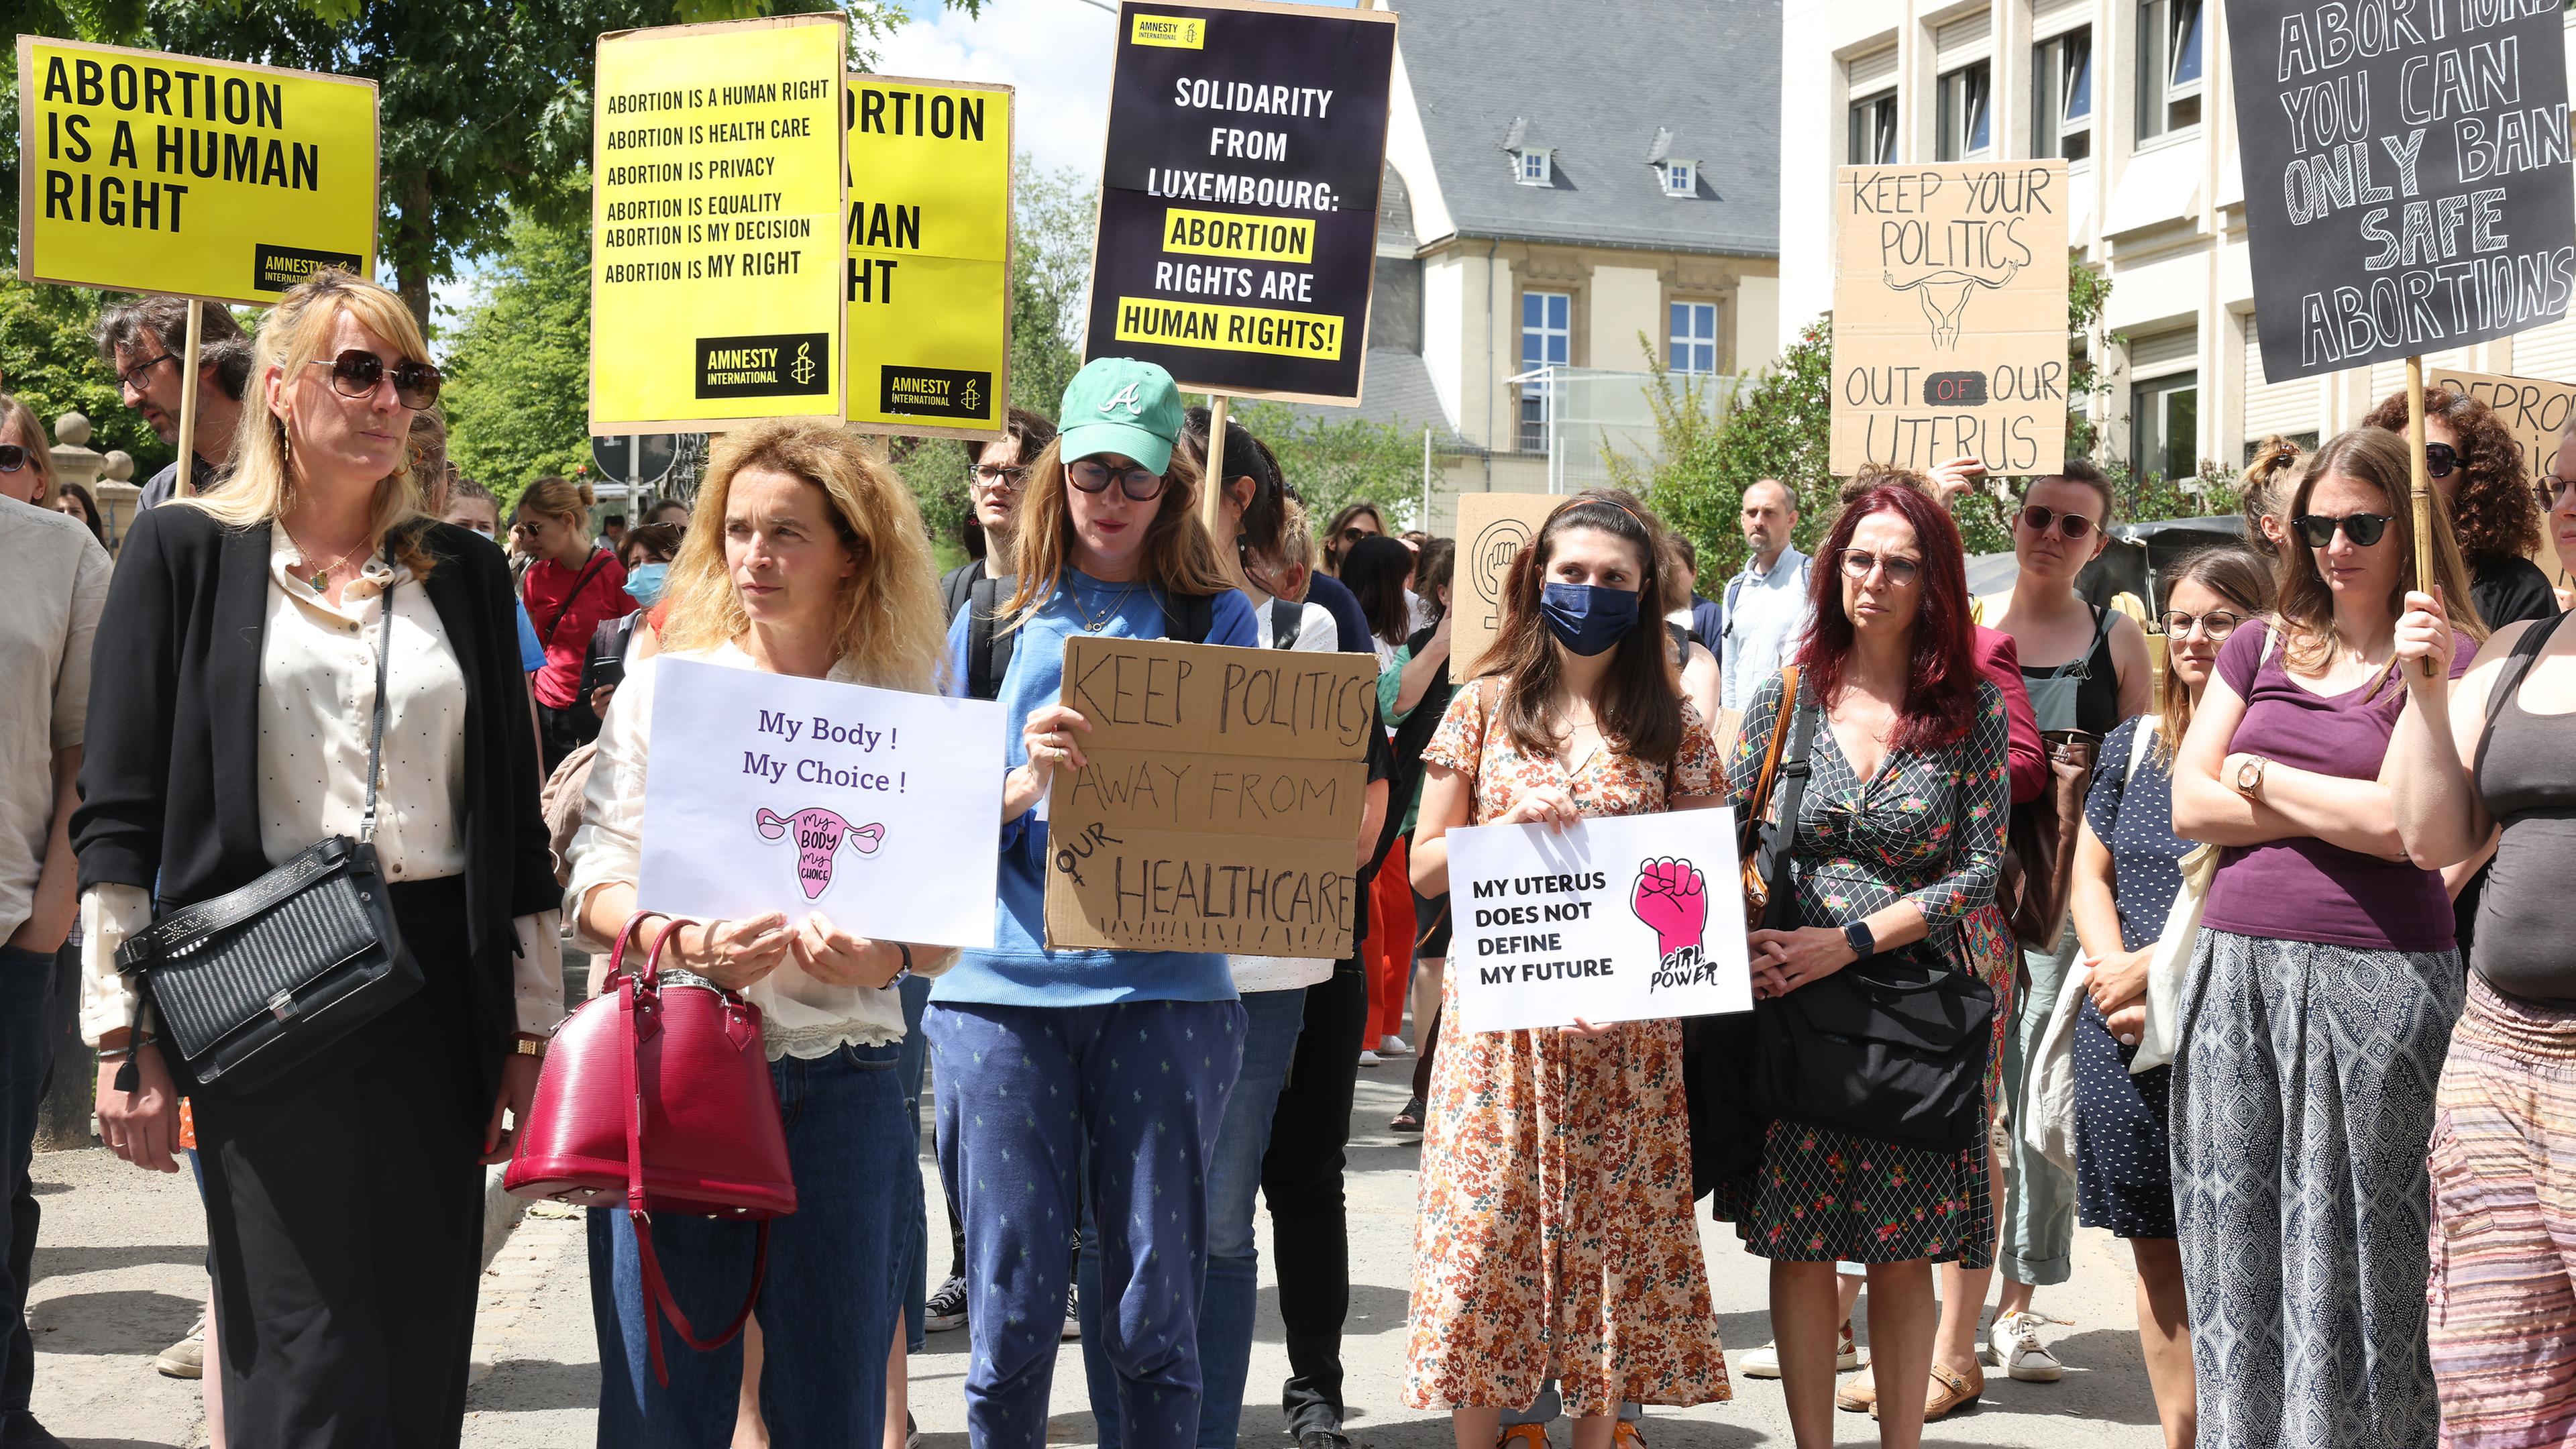 Protests took place outside the US embassy in Luxembourg when the Supreme Court repealed abortion rights in the United States in 2022 